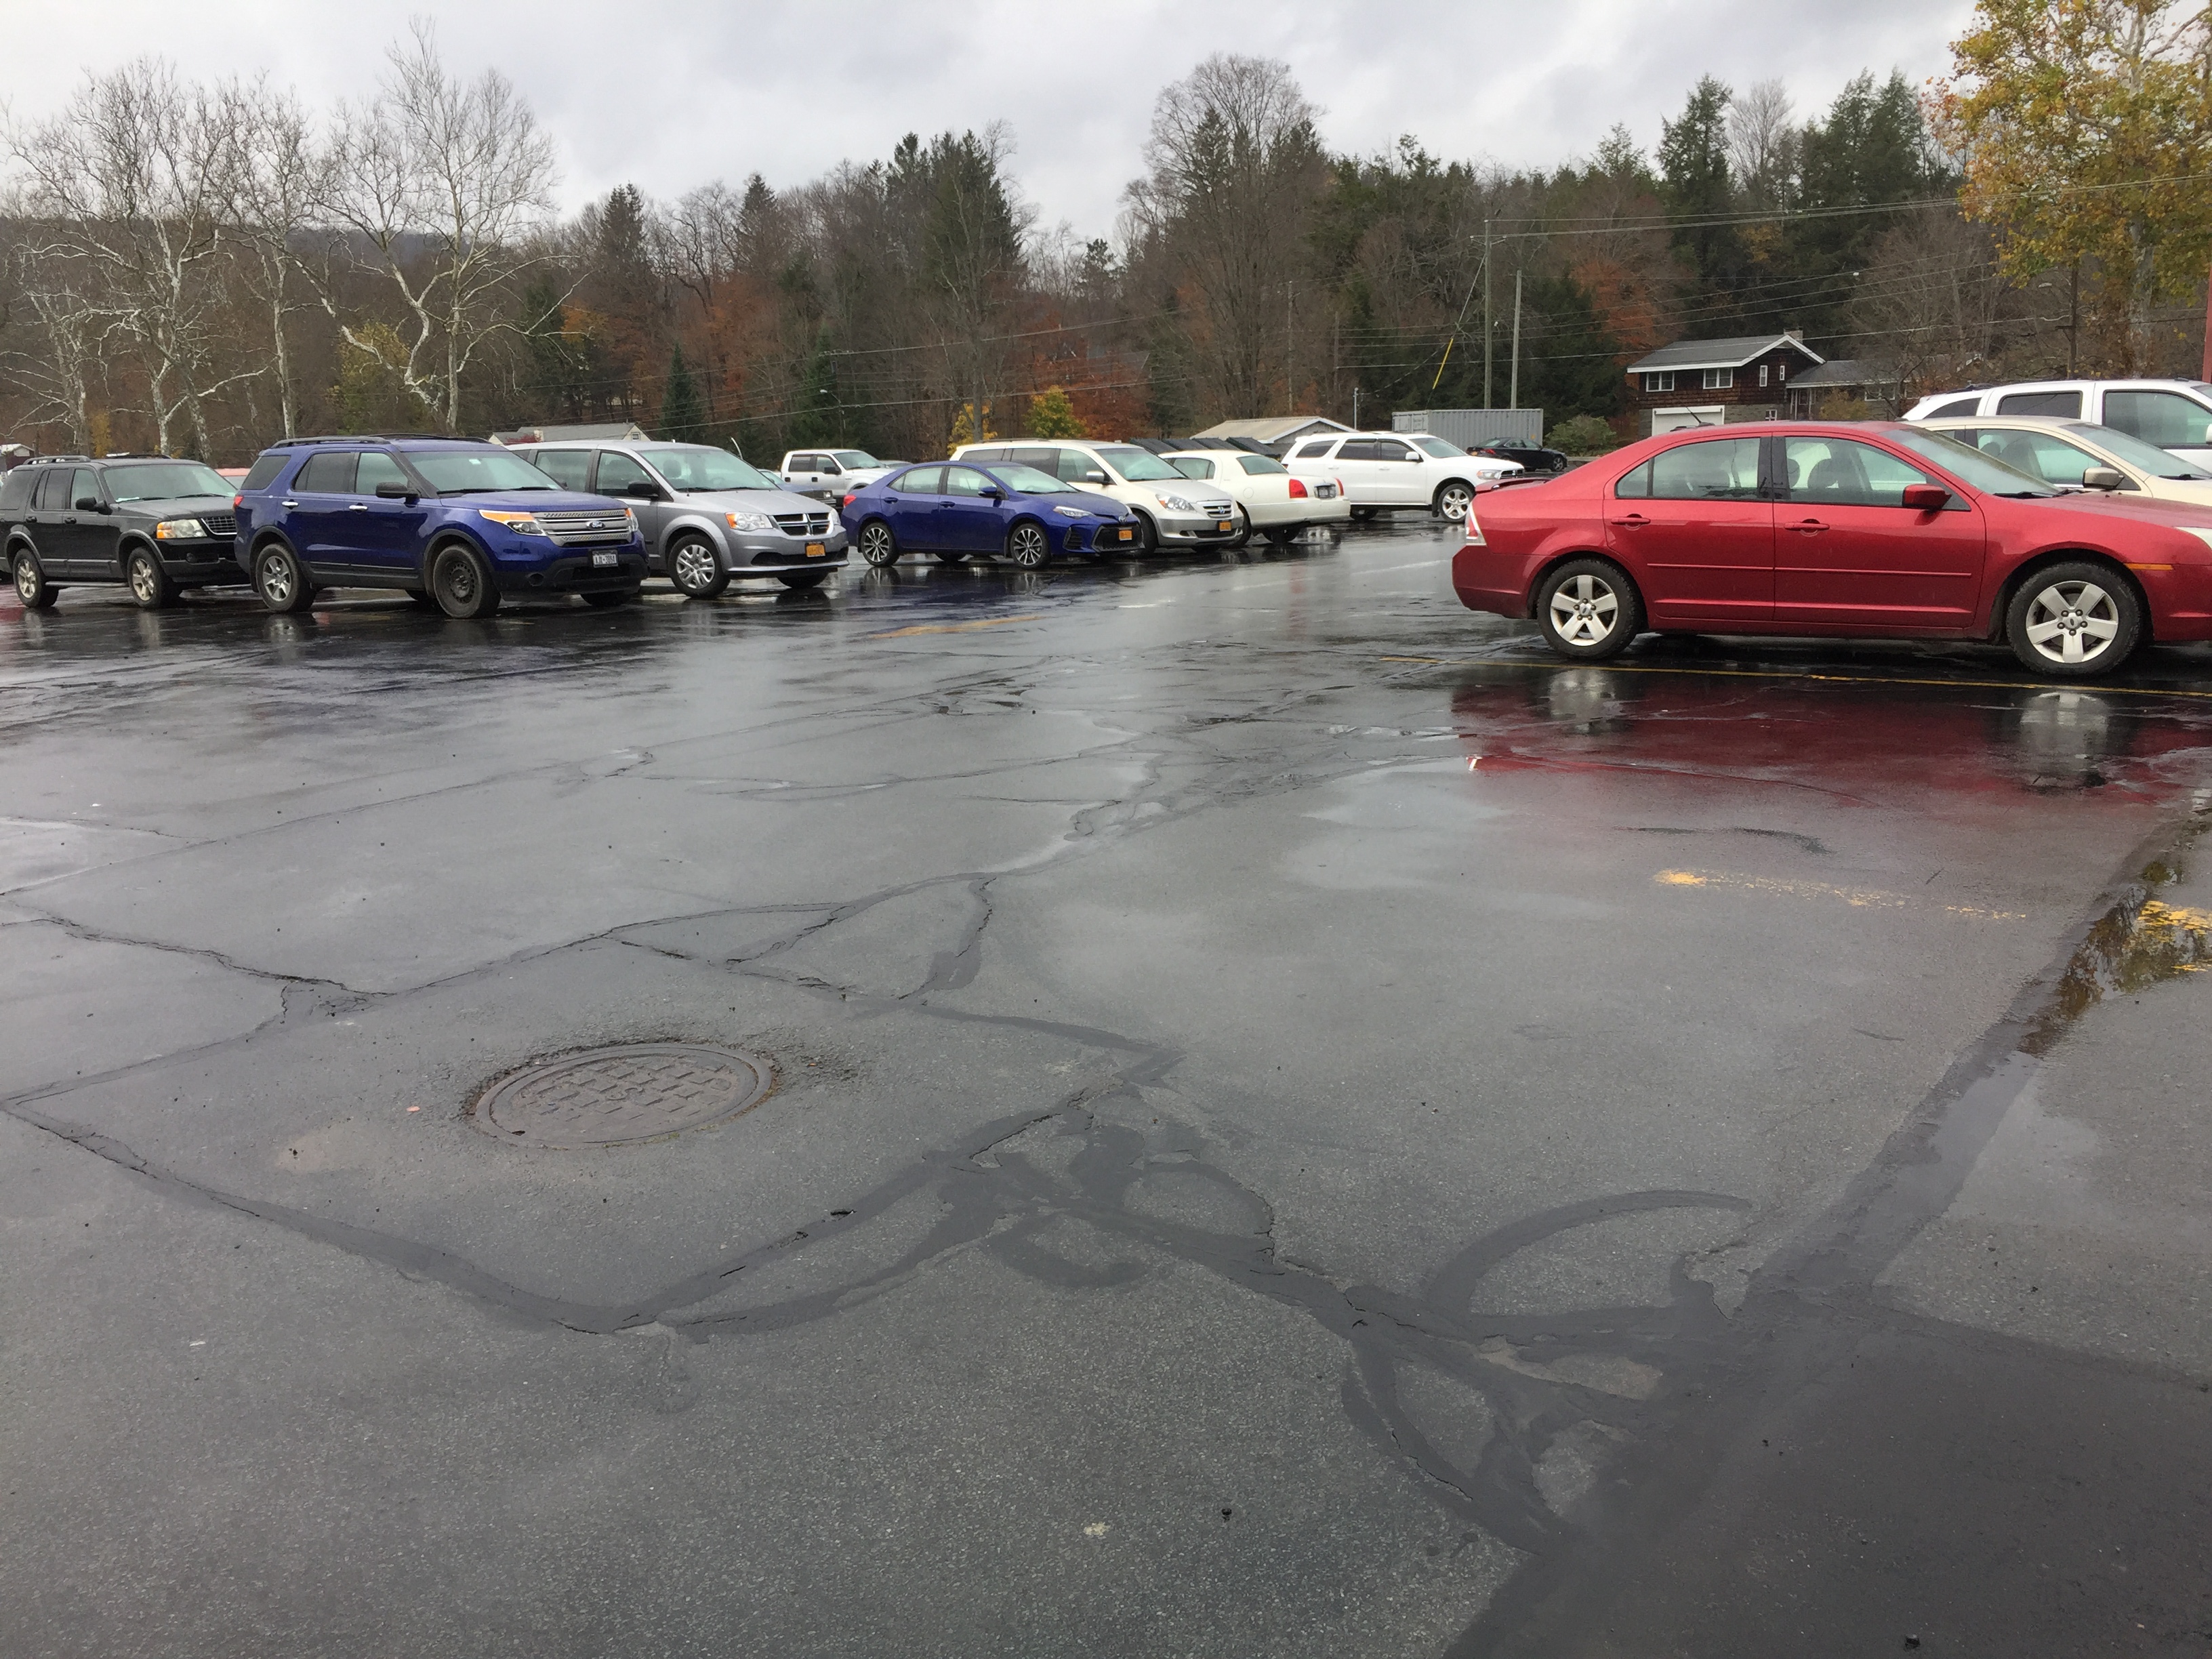 Cracks in the parking lot